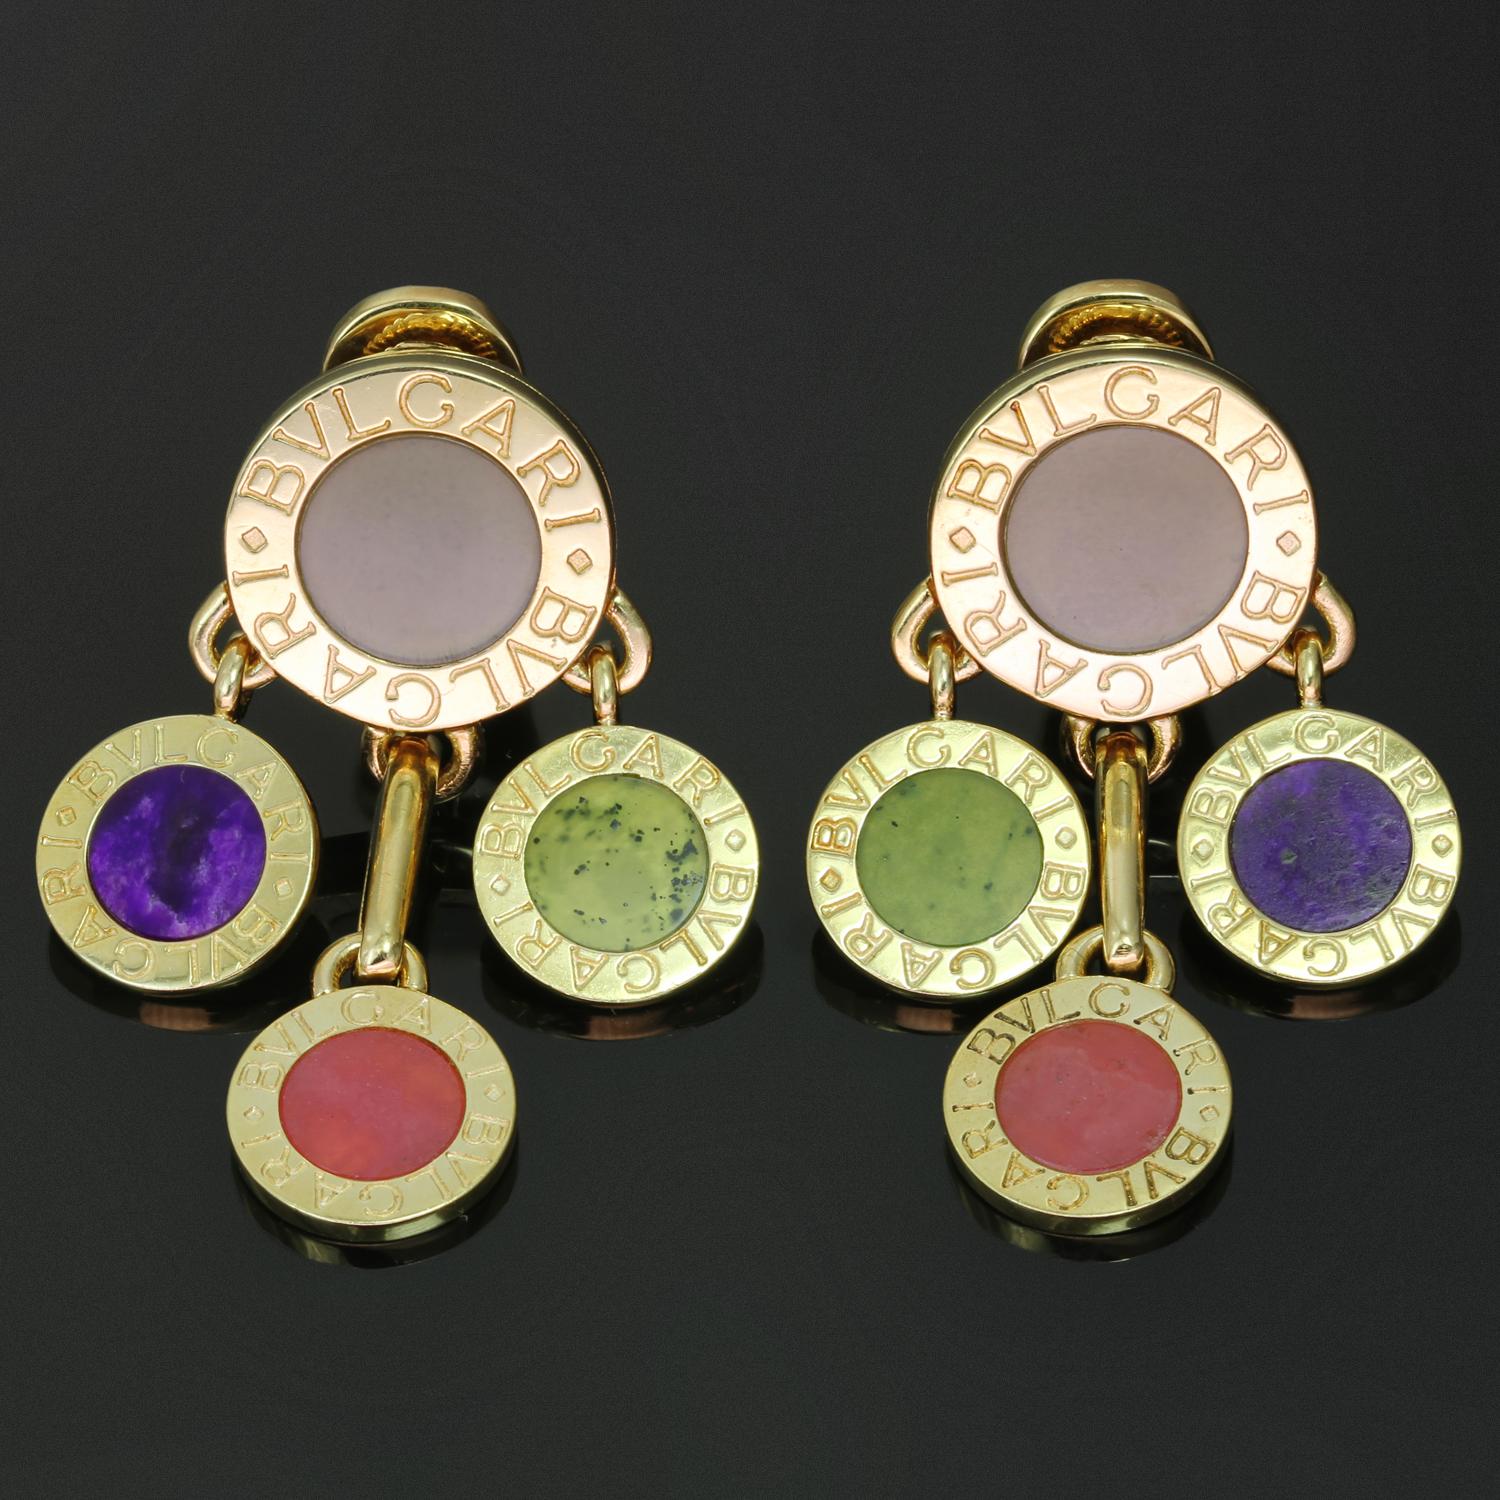 These fabulous Bvlgari clip-on earrings are crafted in 18k yellow gold and feature a drop design composed of Bvlgari-engraved circular elements set with green jade and multicolored rhodochoriste. Made in Italy circa 2000s. Measurements: 0.98